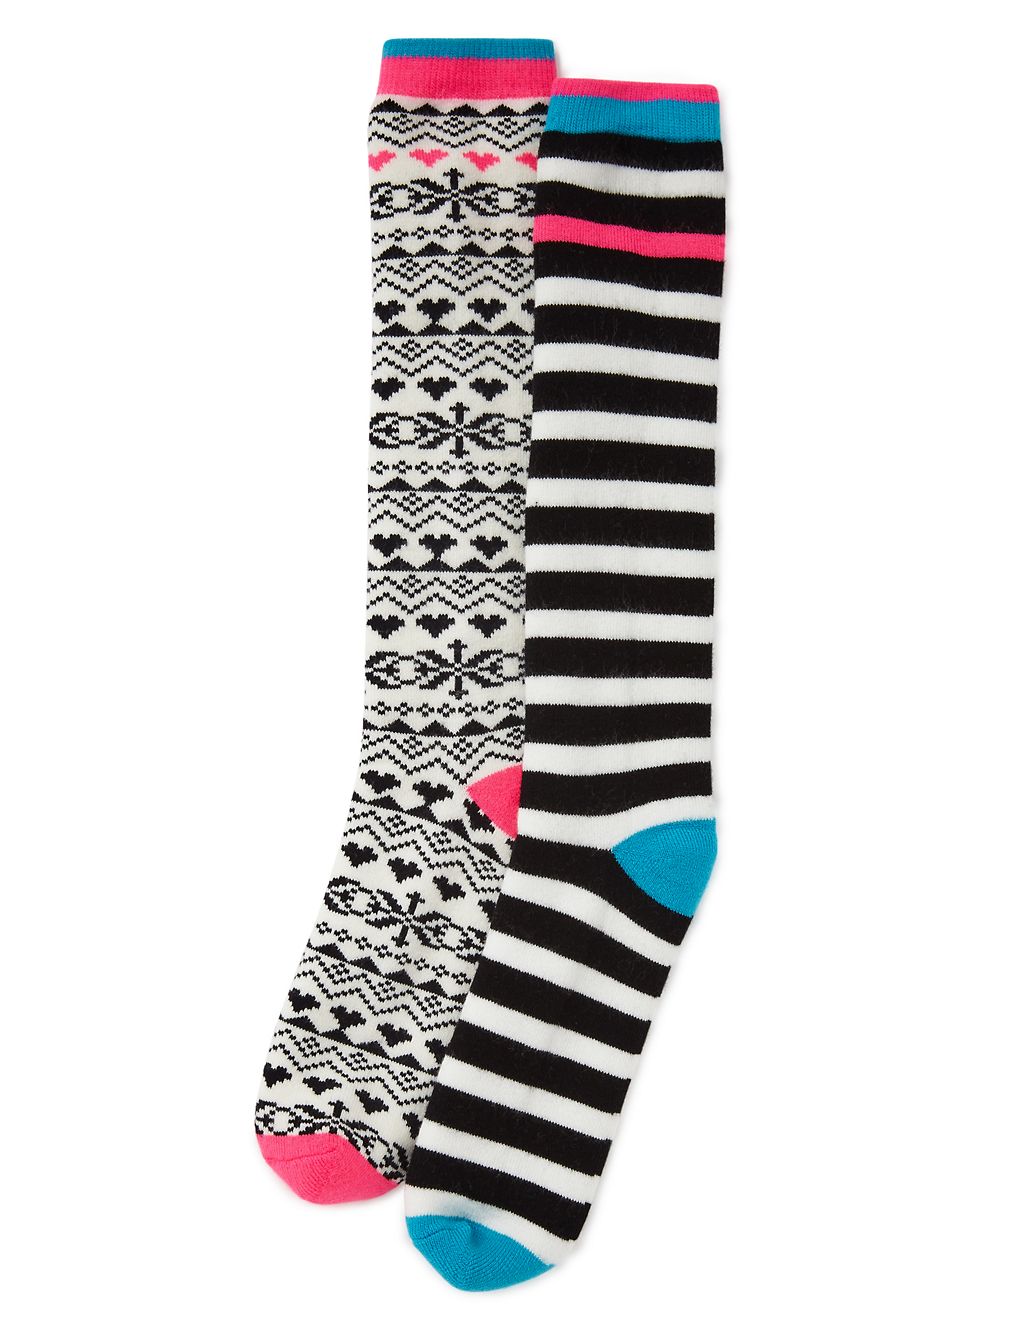 2 Pairs of Freshfeet™ Cotton Rich Monochrome Assorted Welly Socks with Silver Technology (5-14 Years) 1 of 2